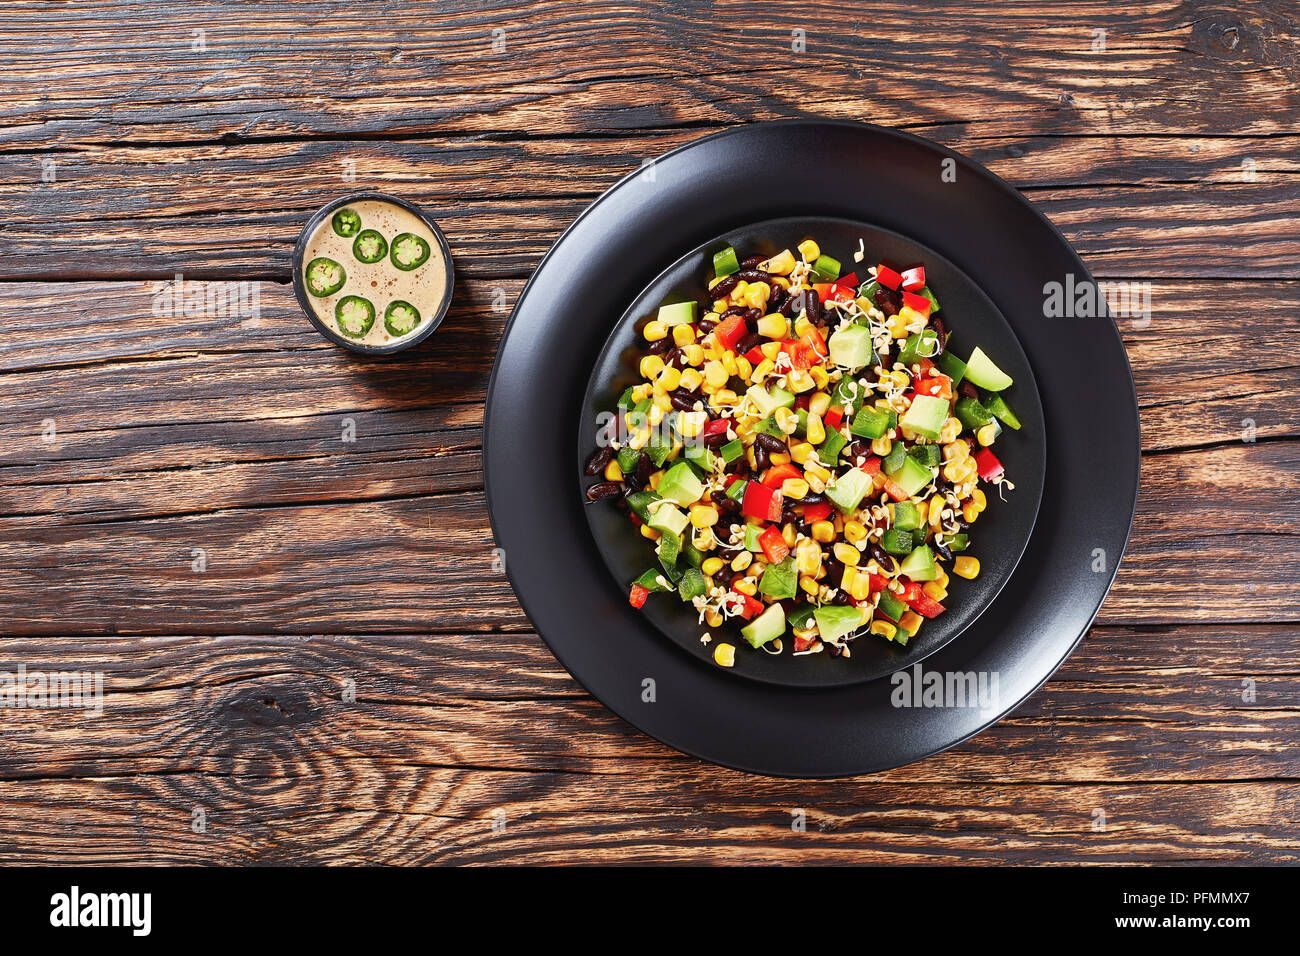 delicious fresh colorful mexican style salad with avocado, black beans, canned corn, buckwheat sprouts, diced red and green pepper served on black pla Stock Photo